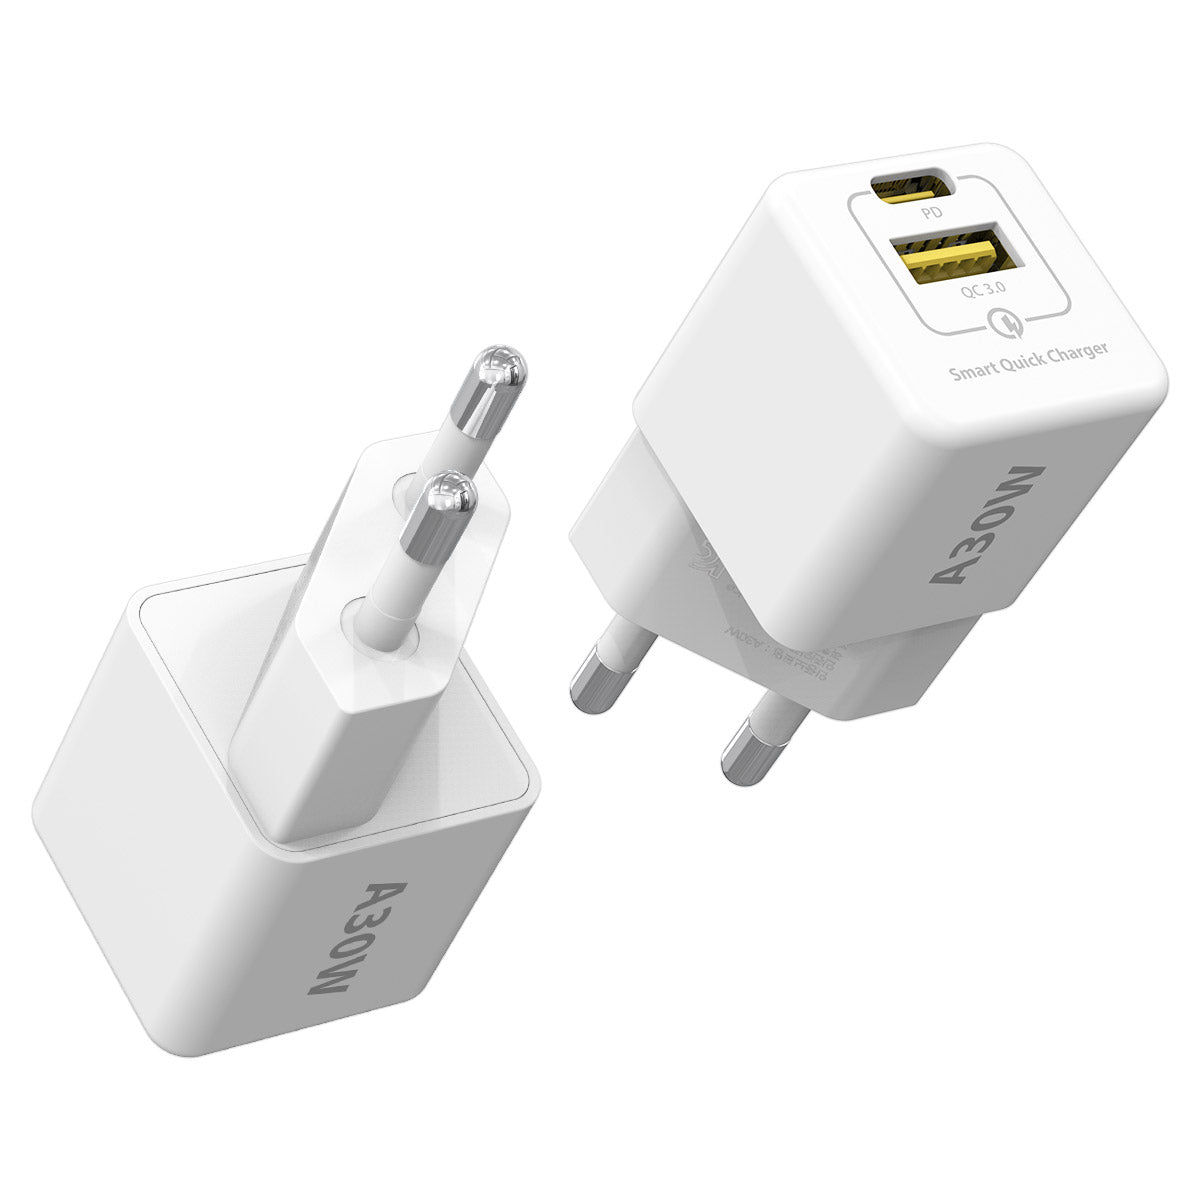 Renergy A30W Compact Fast Charging Adapter by Araree